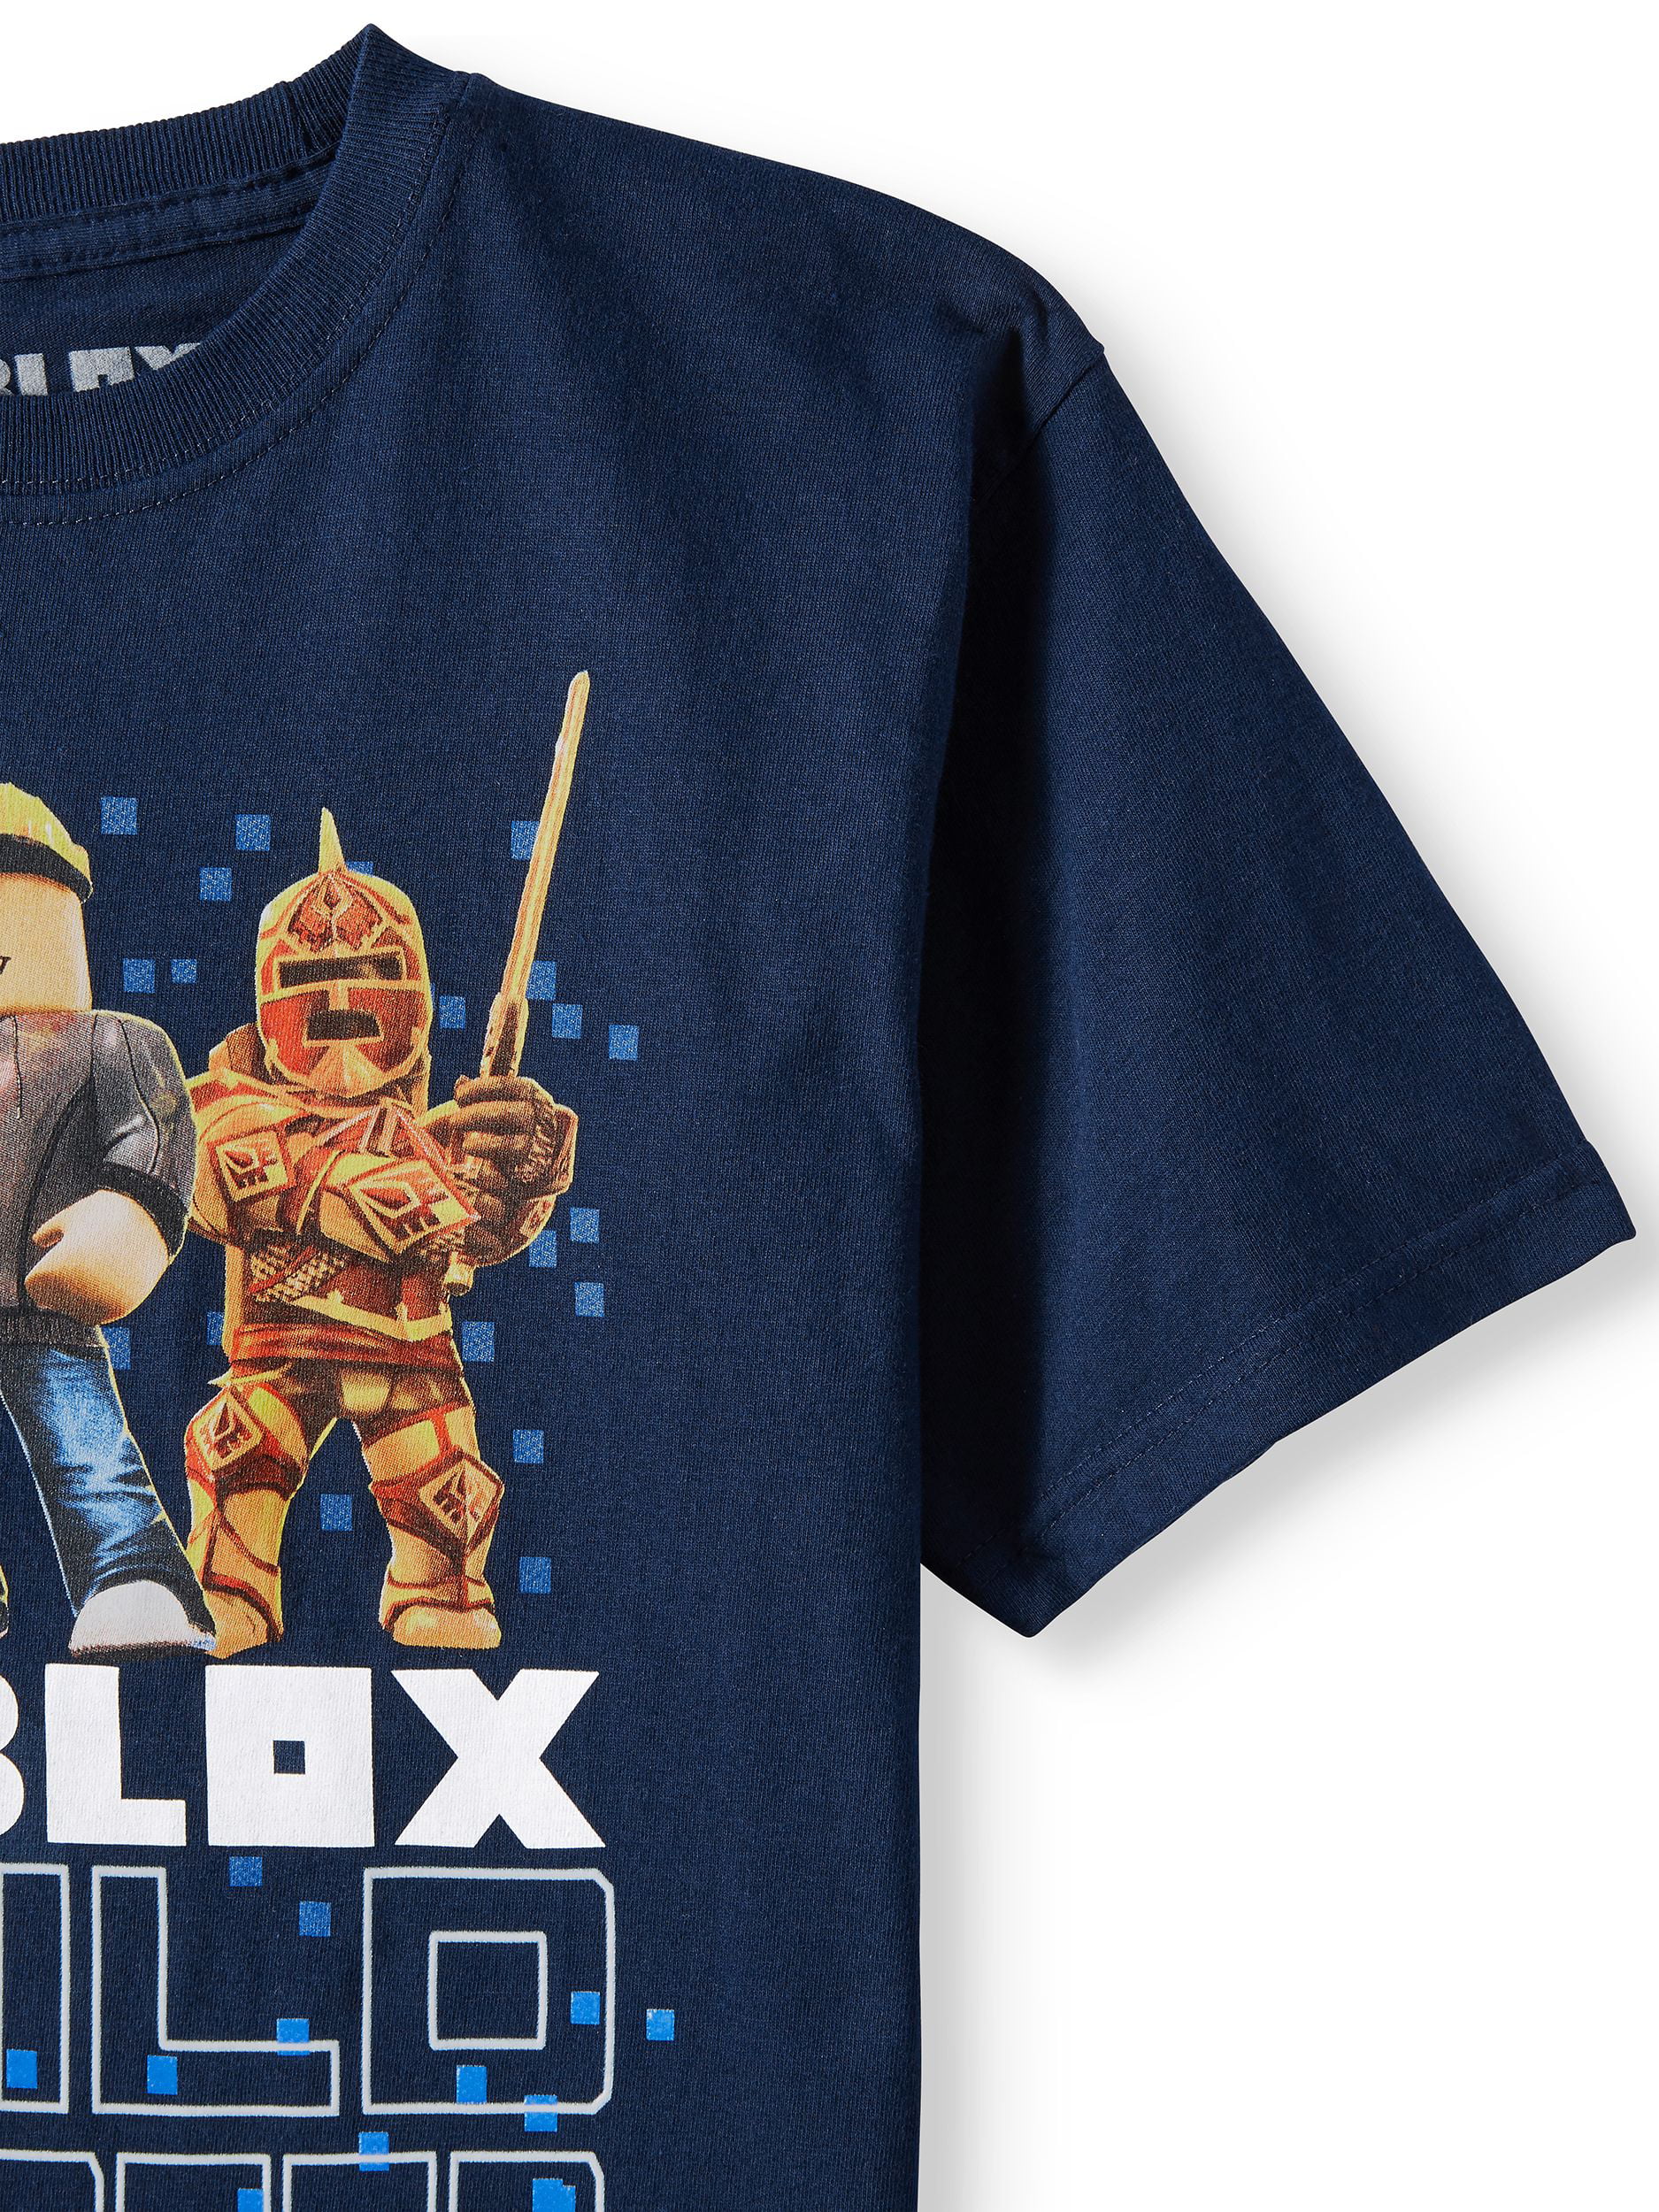 Roblox Roblox Build Greater Short Sleeve Graphic T Shirt Sizes